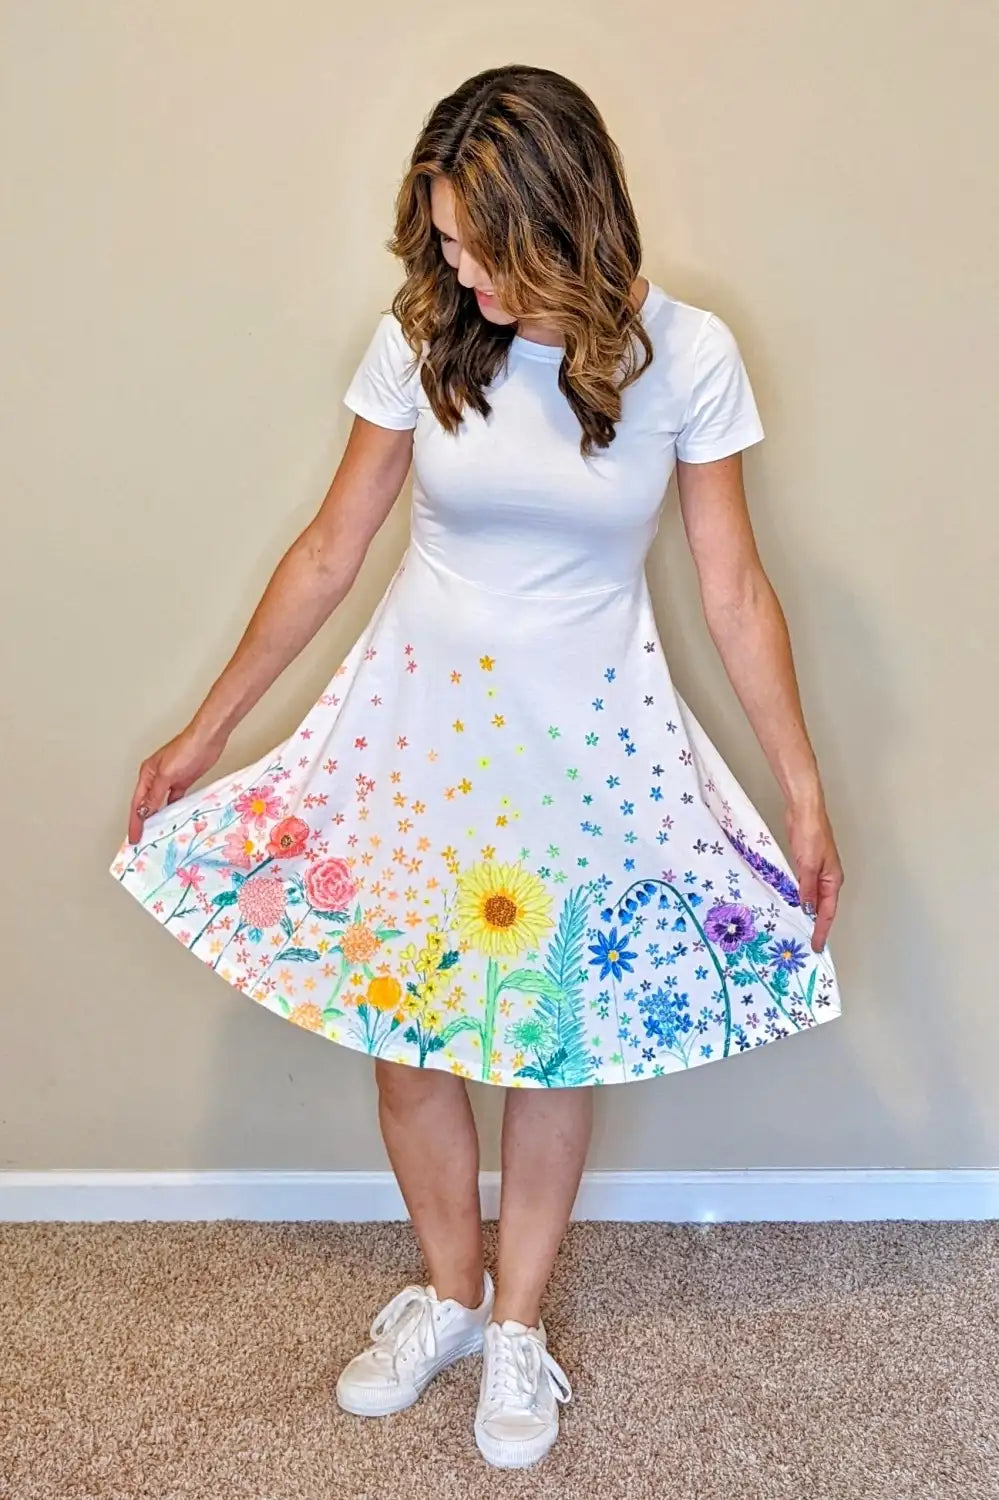 DIY doodle dress with fabric markers